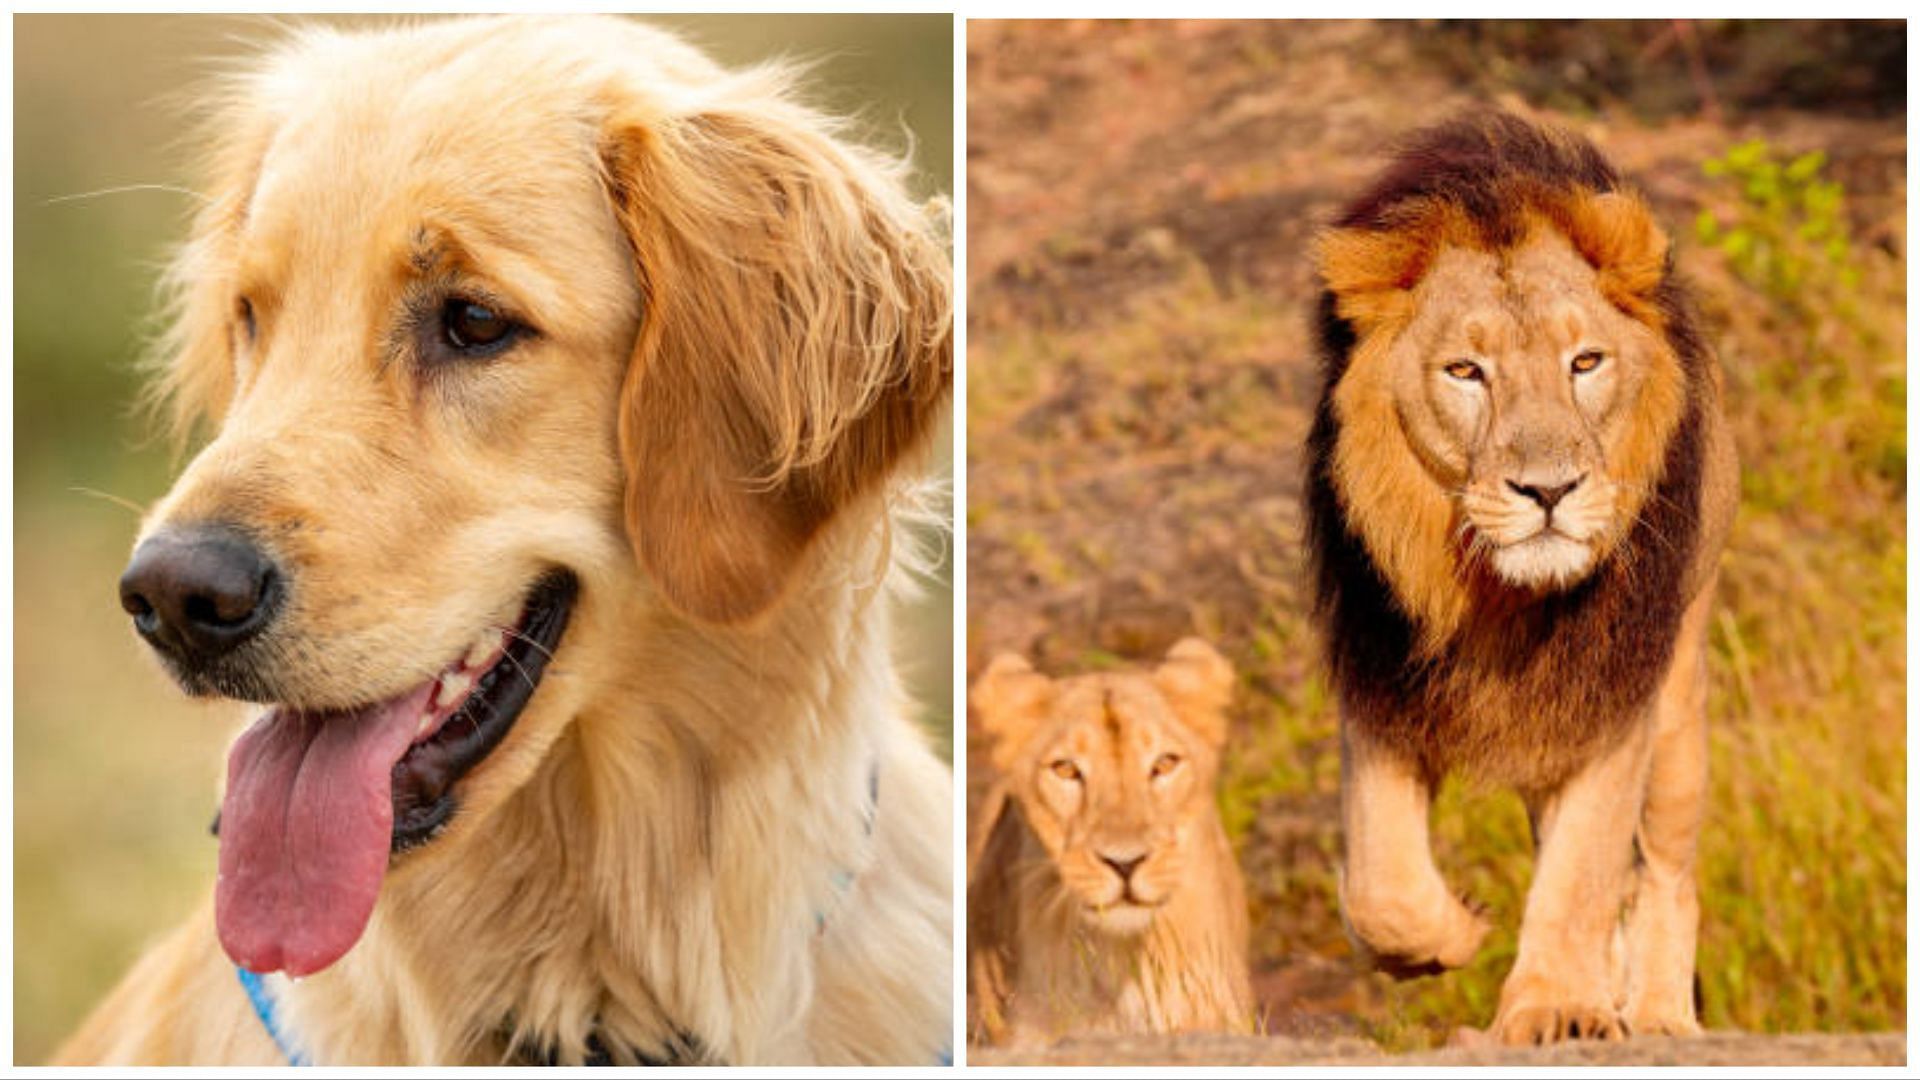 Chinese zoo tried to pass off a dog as a lion (Image via Getty Images)